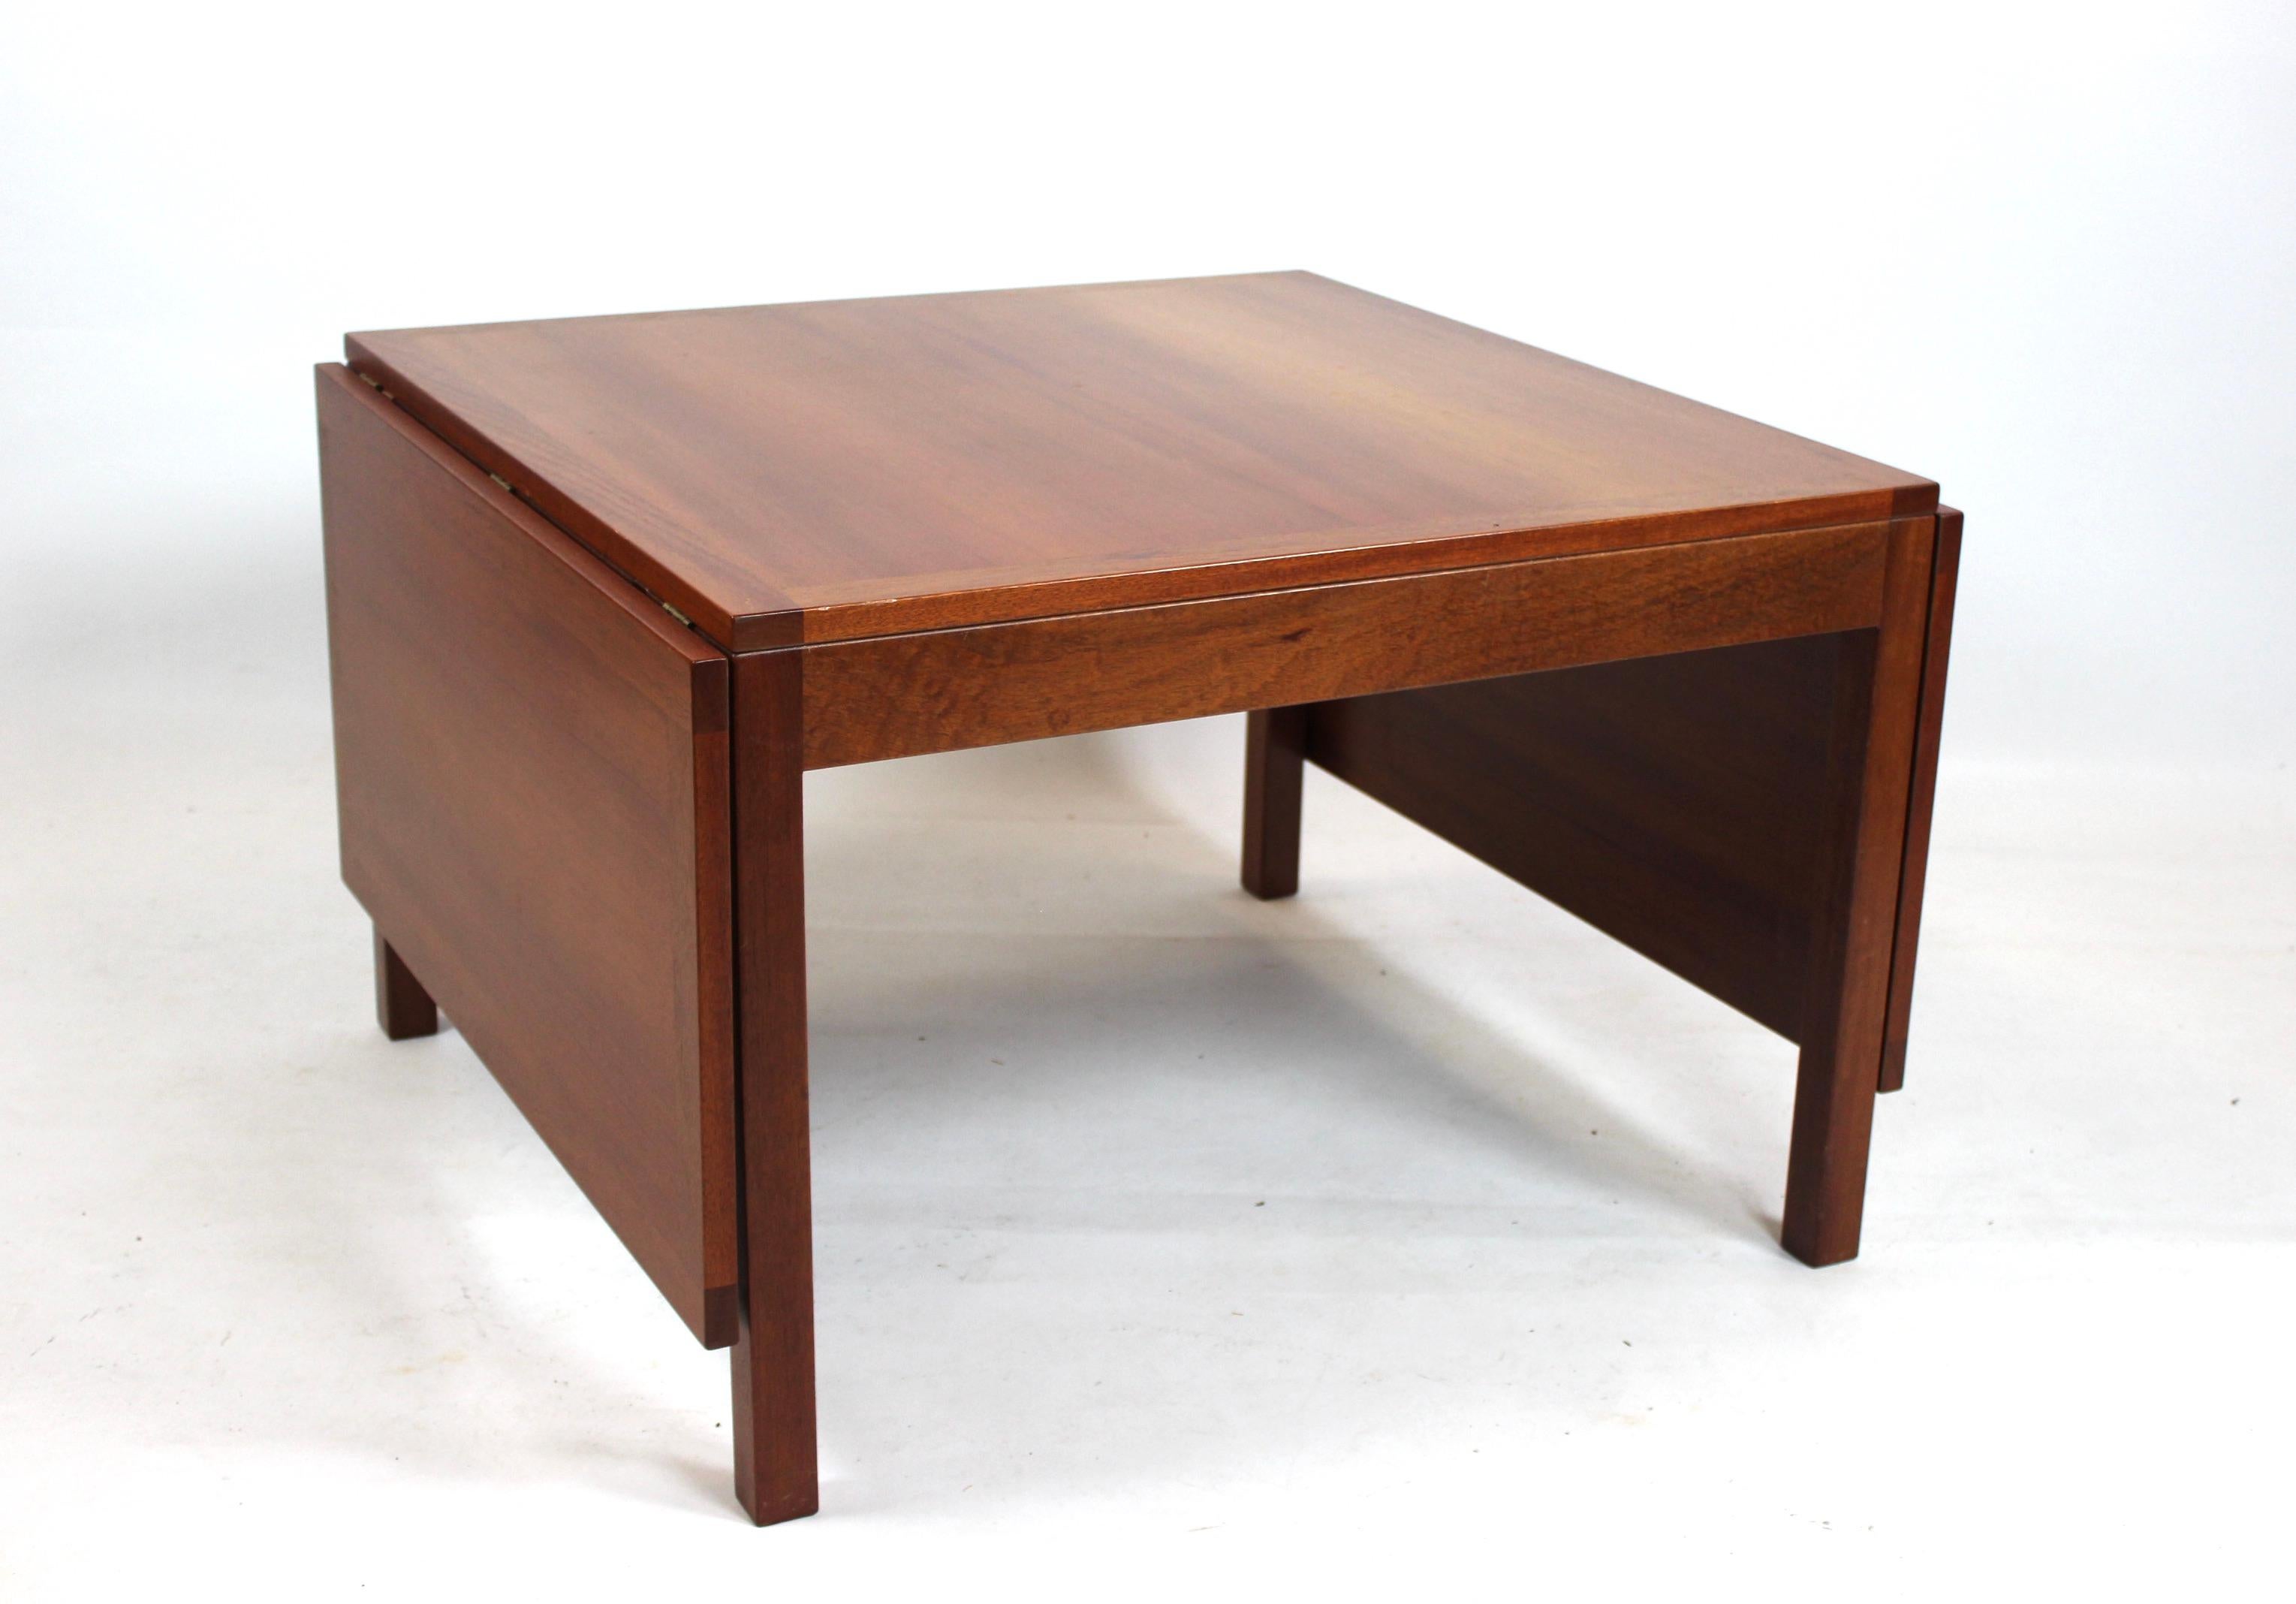 Mid-20th Century Folding Table in Cherry of Danish Design from the 1960s